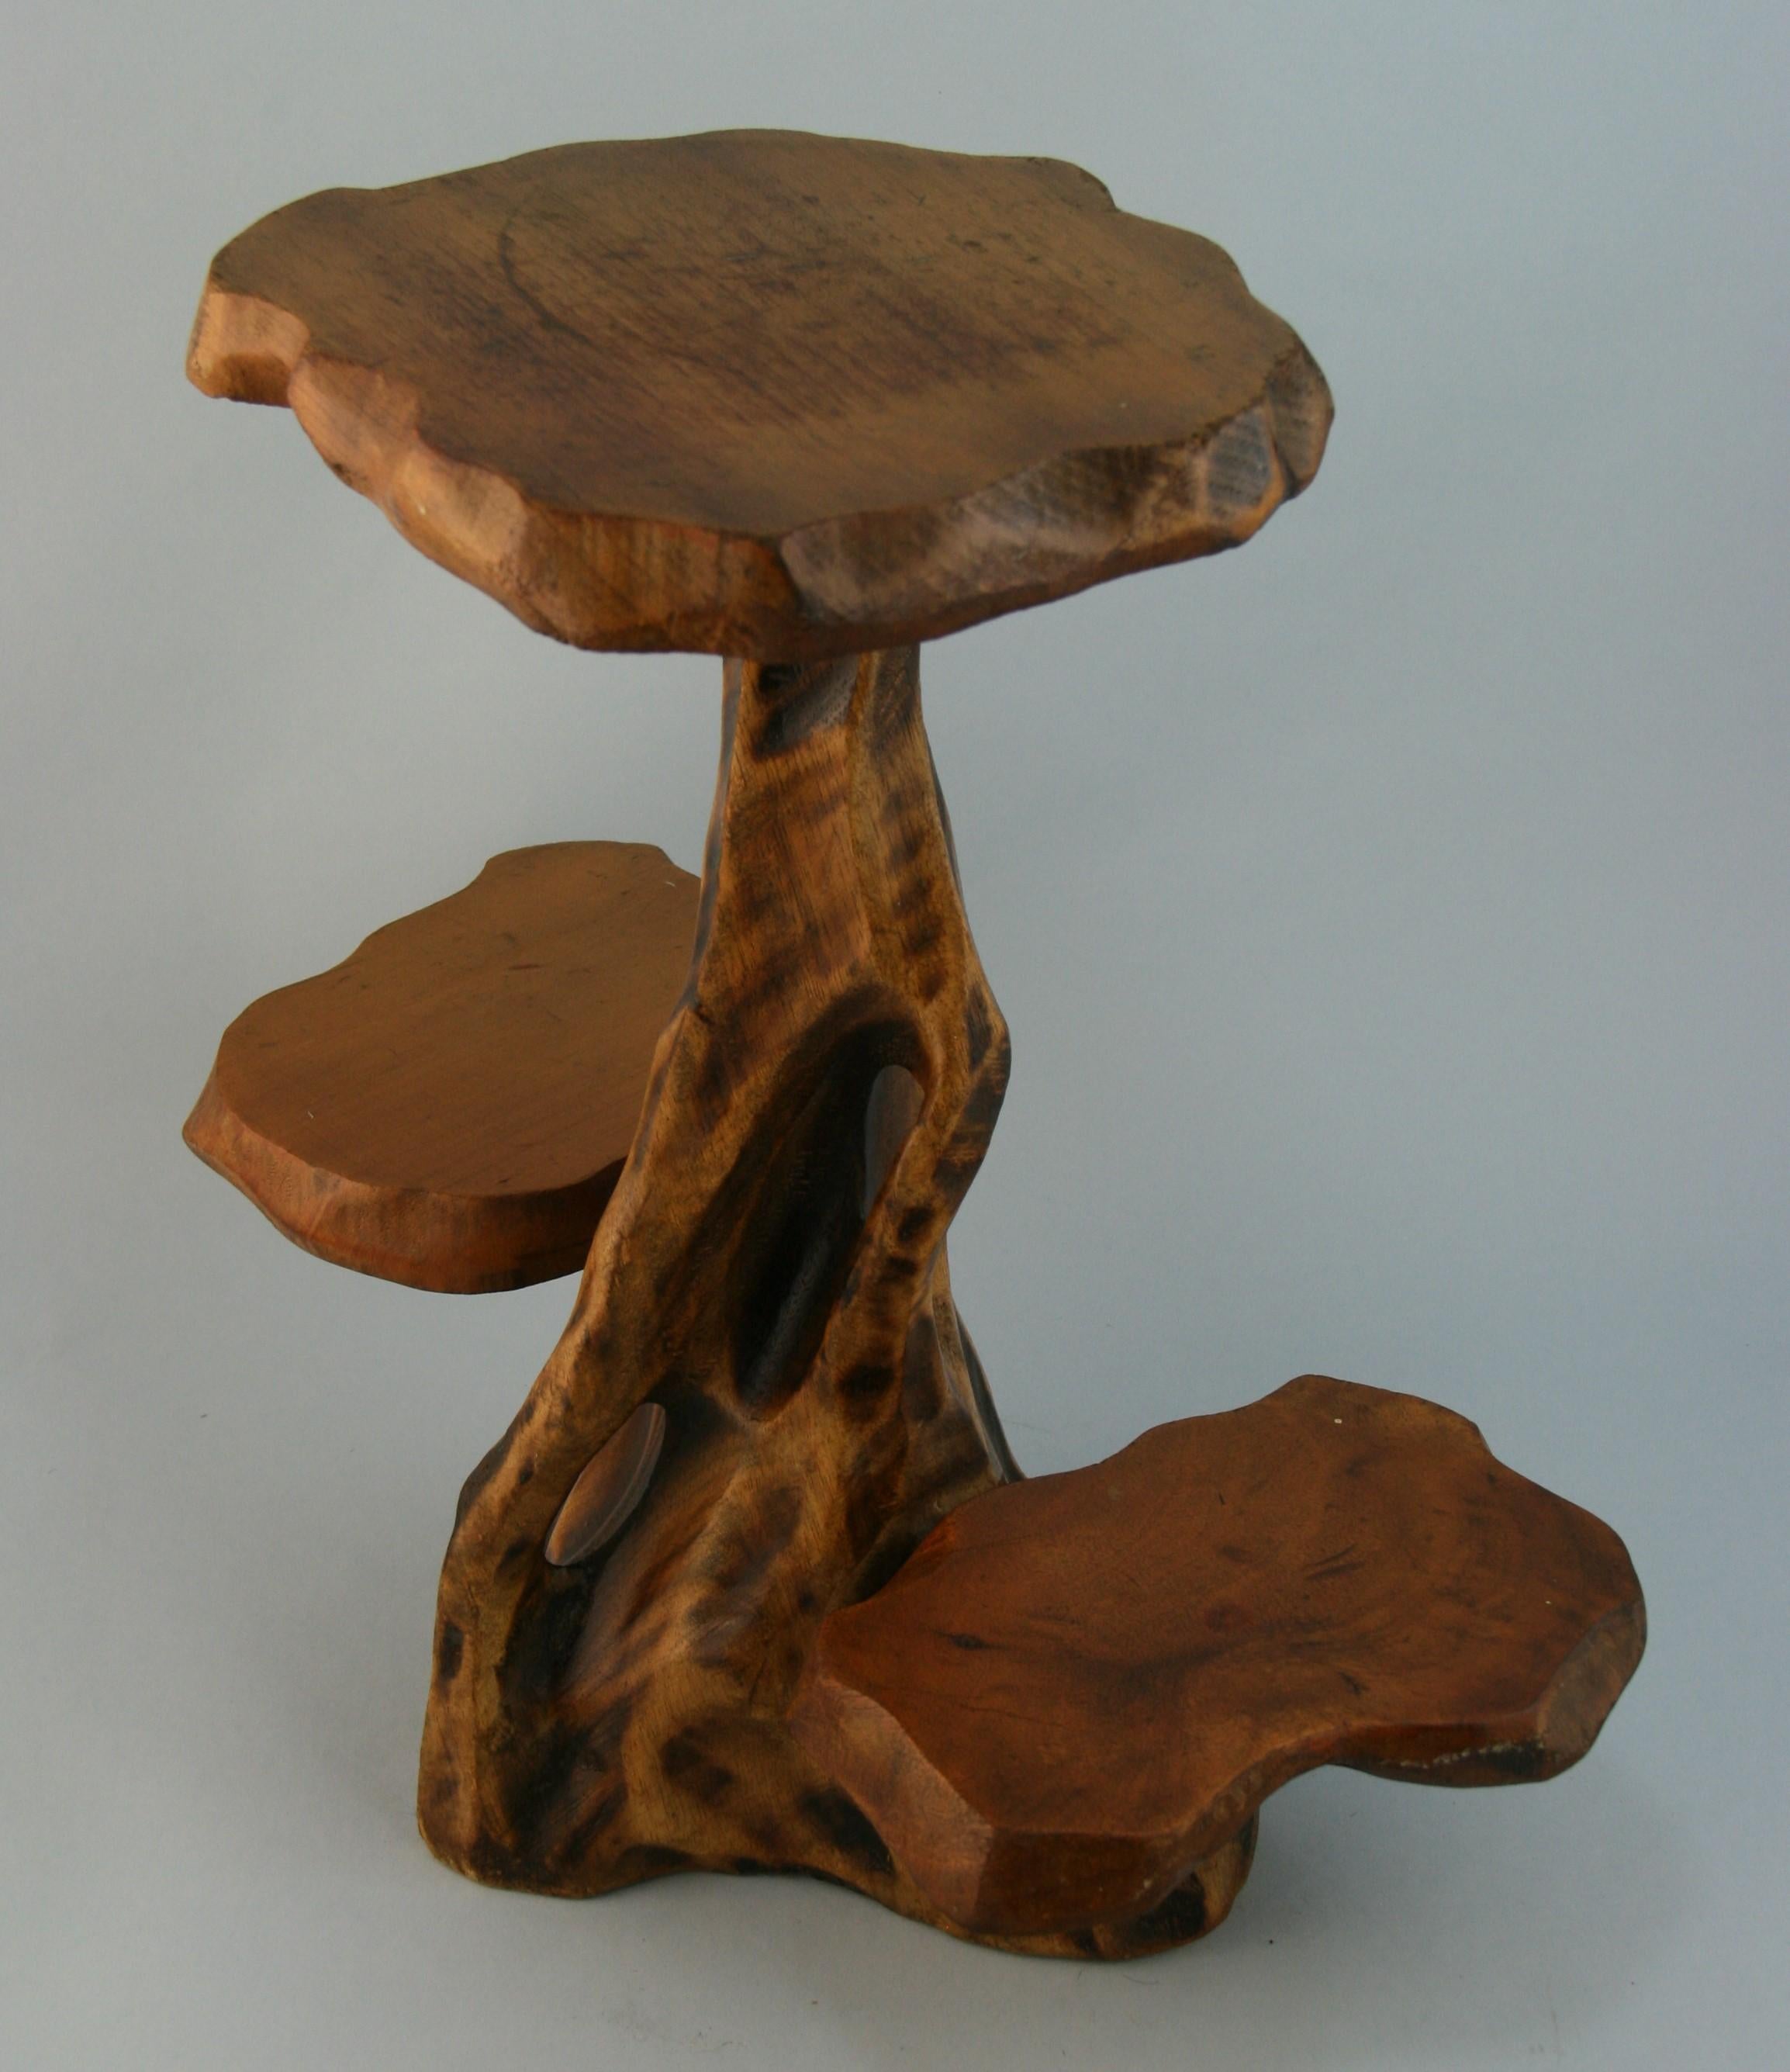 Hand-Crafted Japanese Bonsai Driftwood Plant Stand